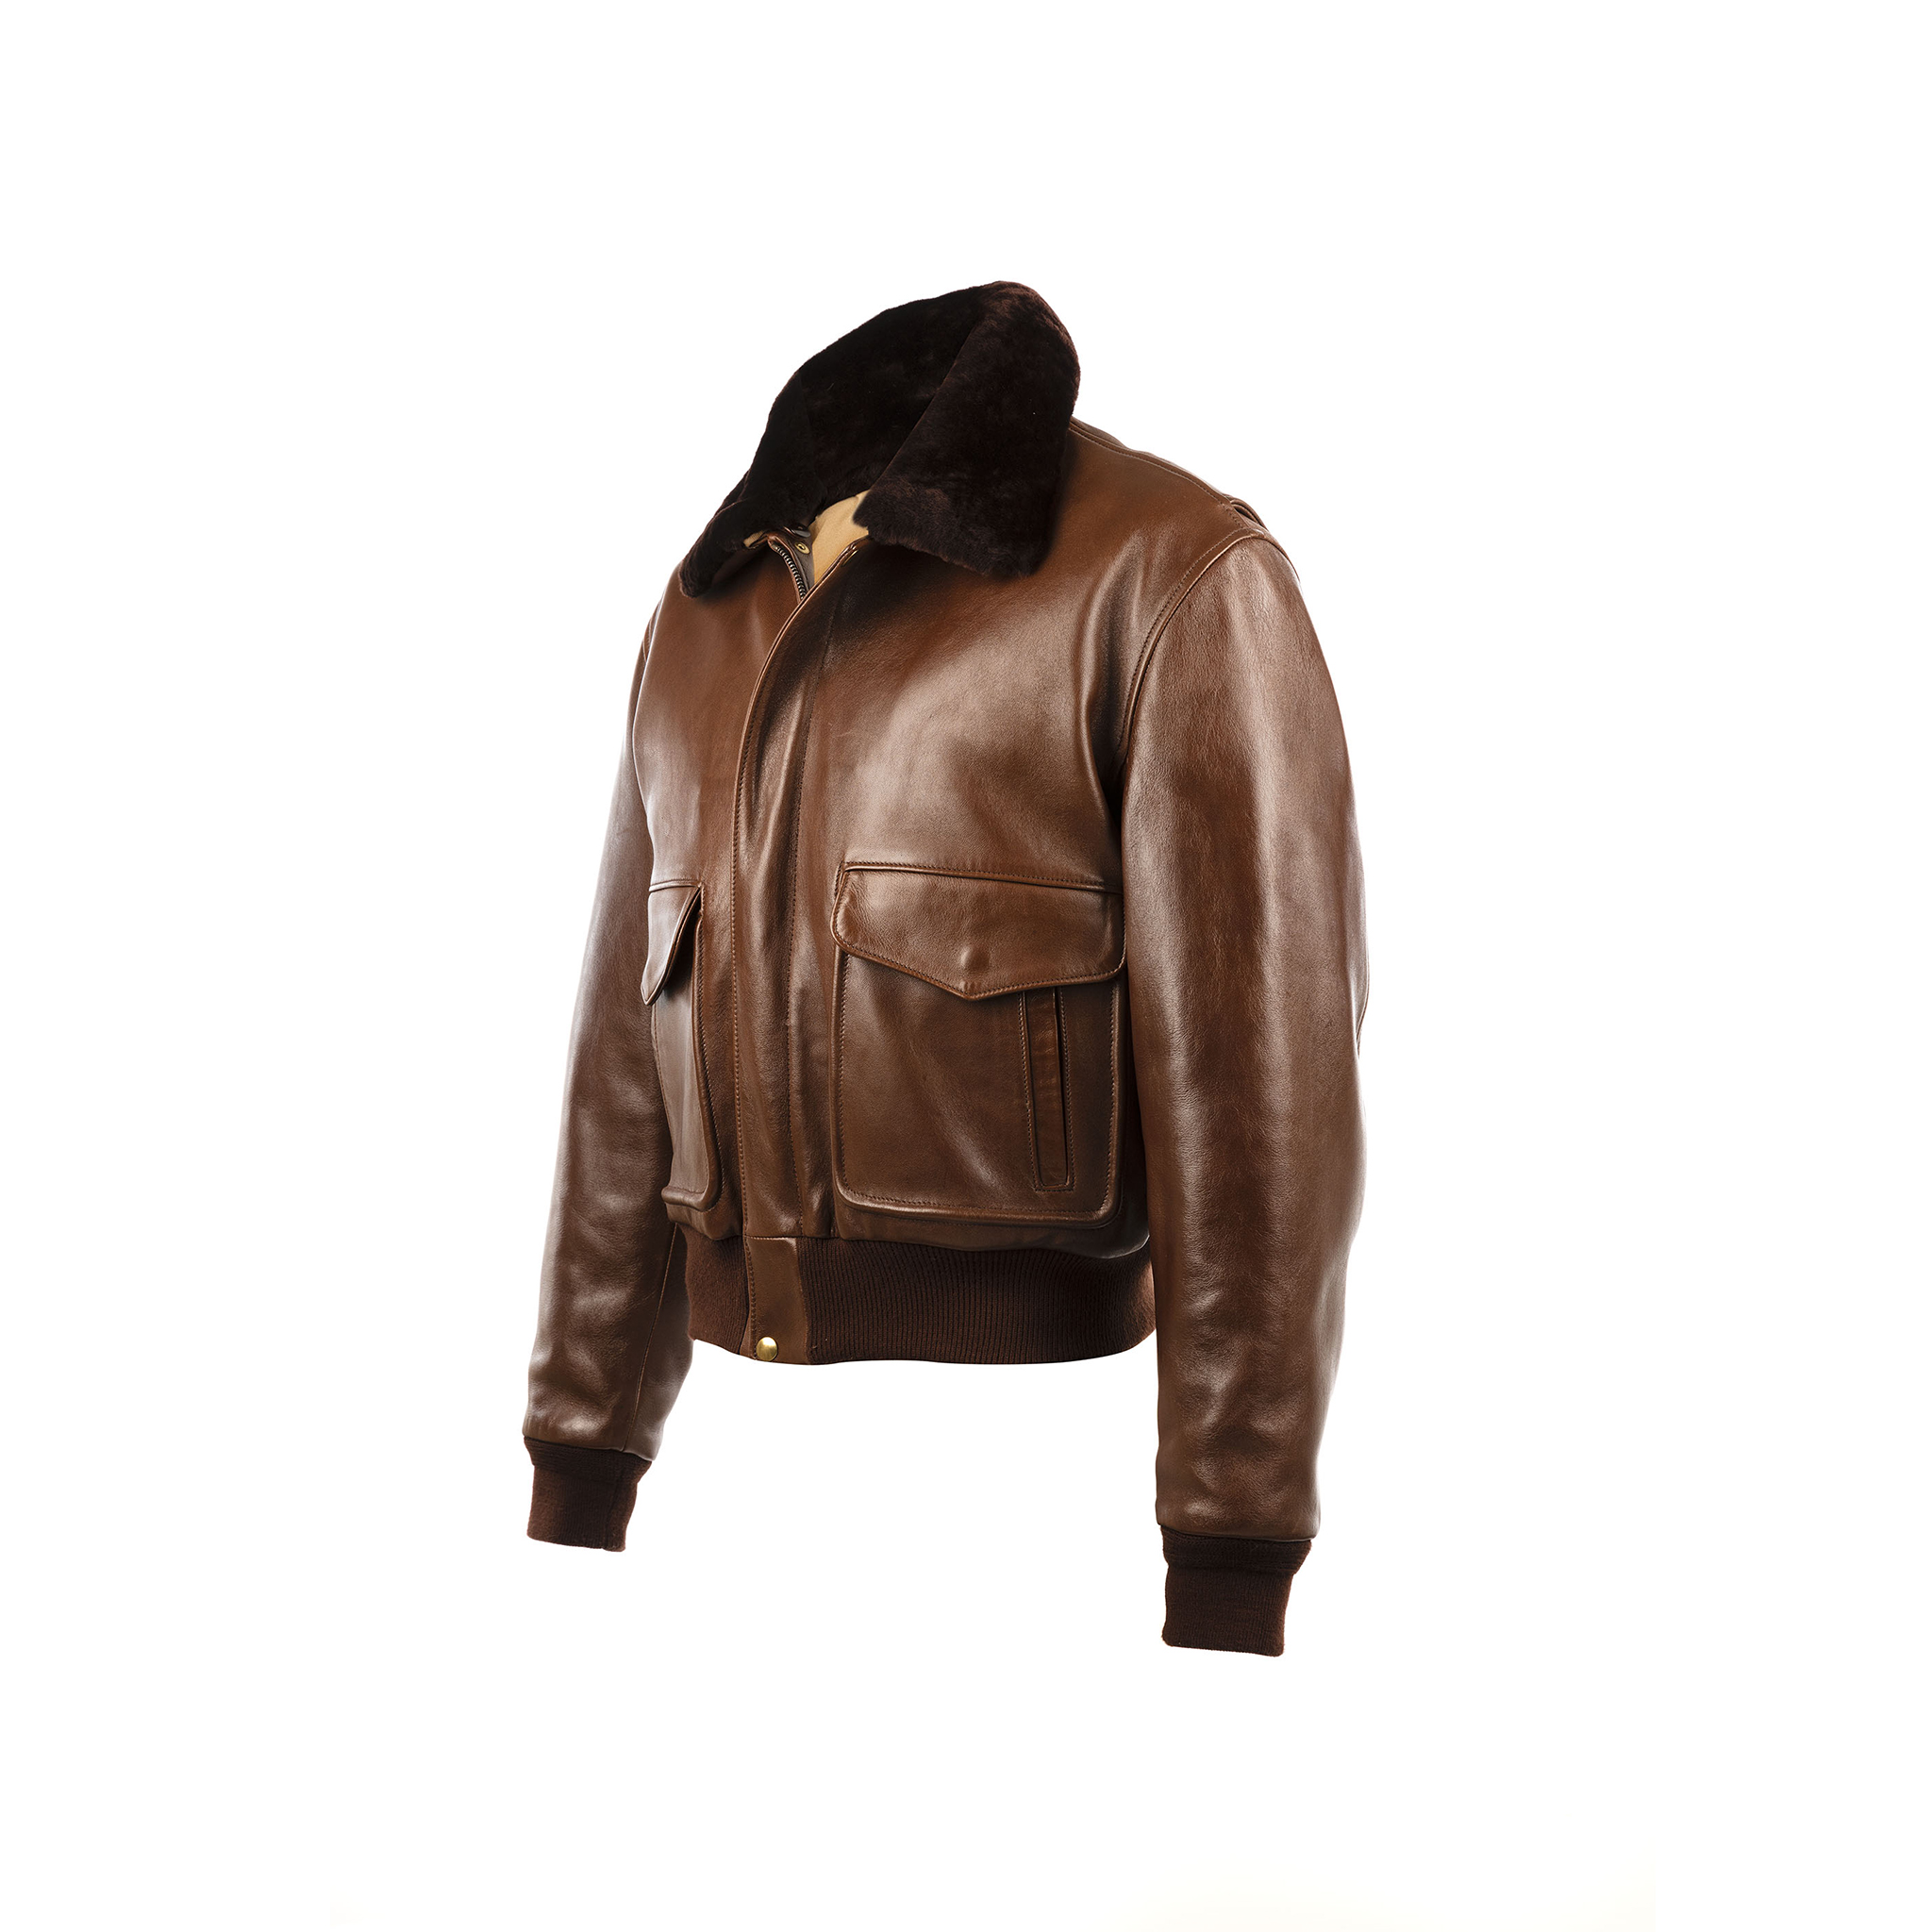 USAAF Jacket - Glossy leather - Brown color